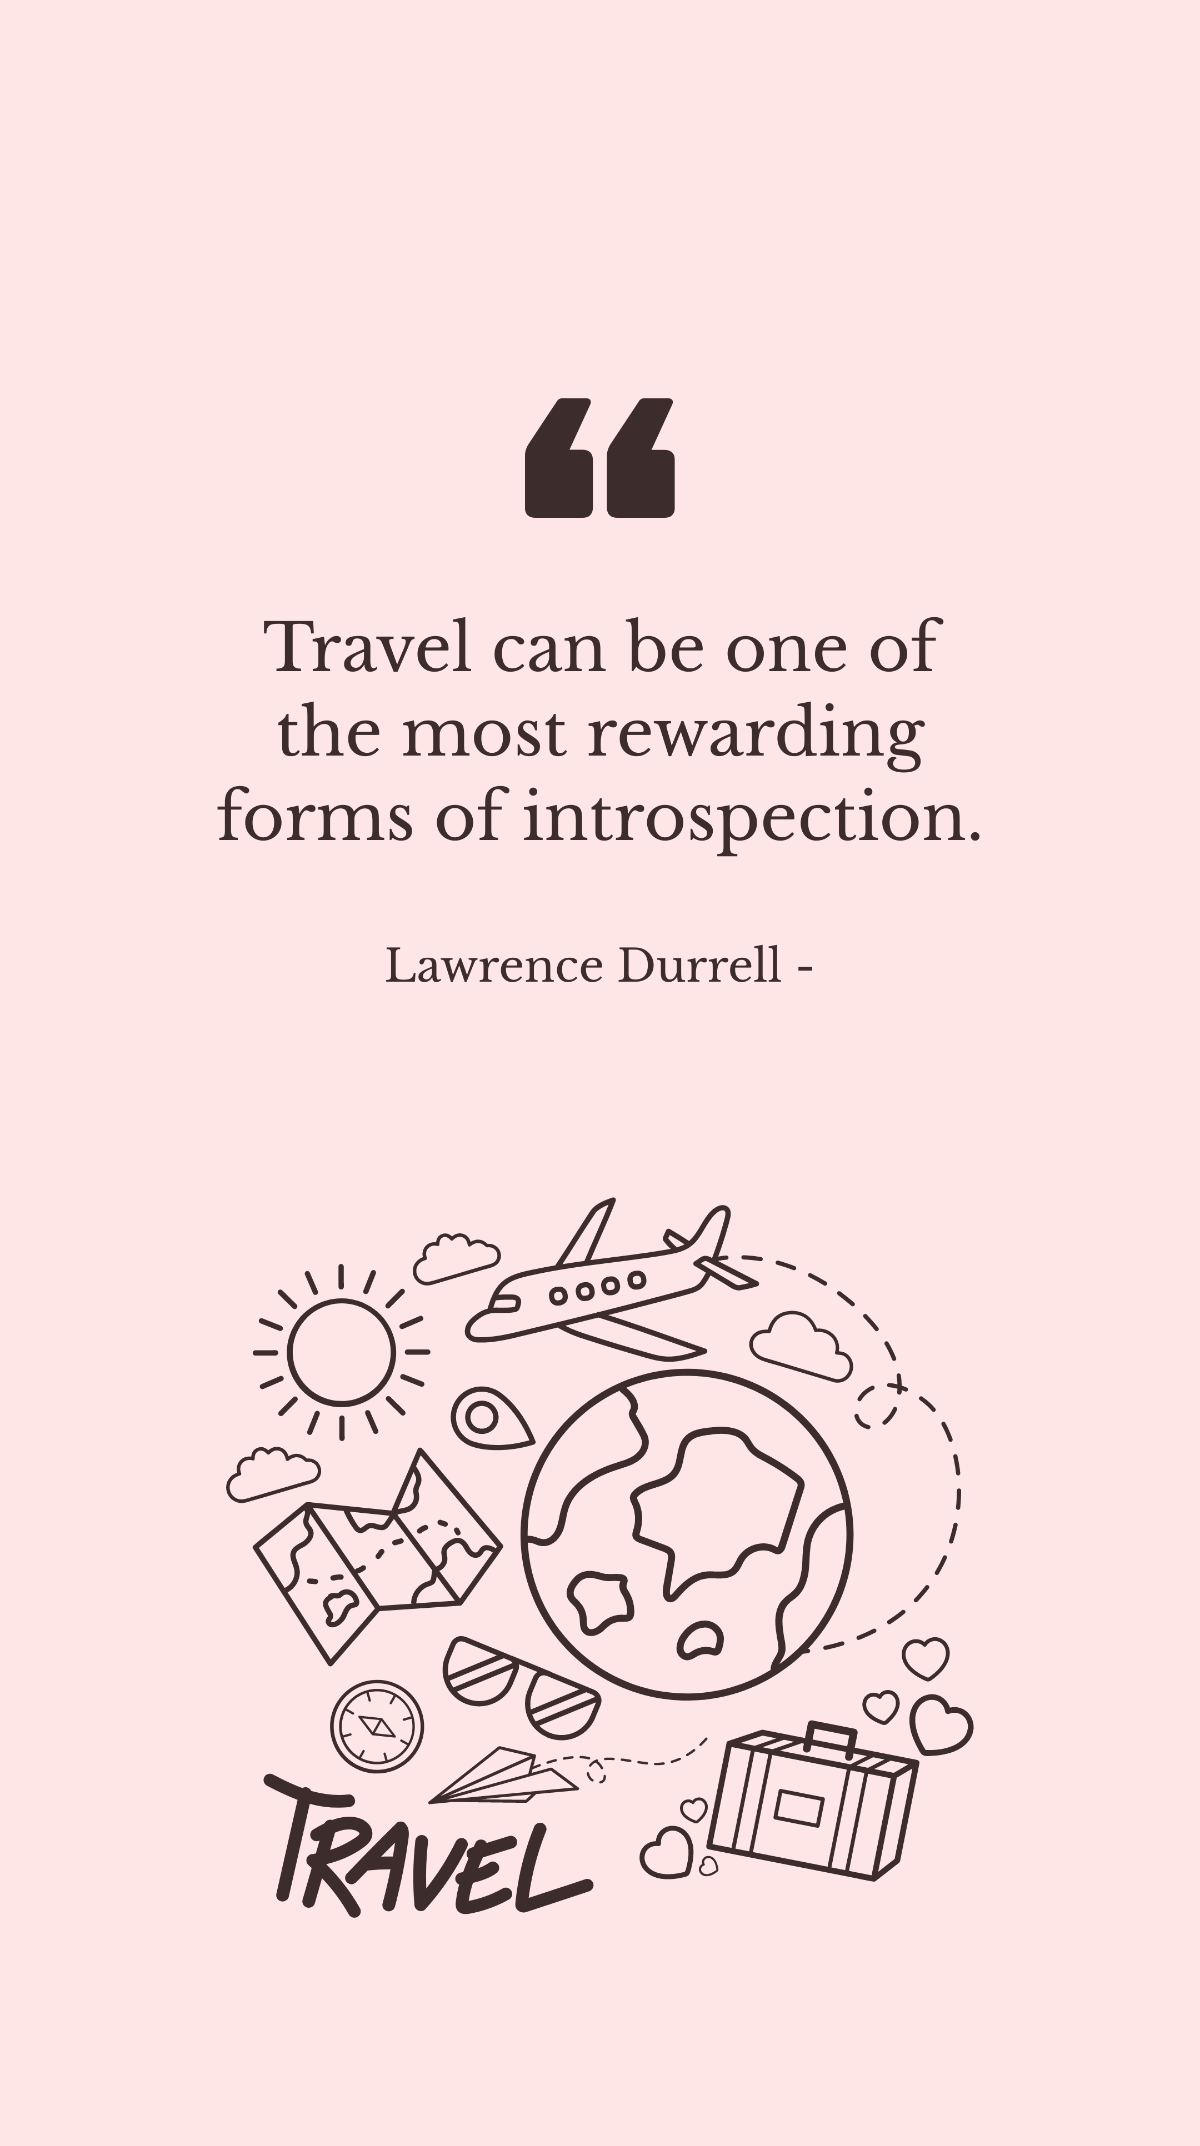 Free Lawrence Durrell - Travel can be one of the most rewarding forms of introspection. Template